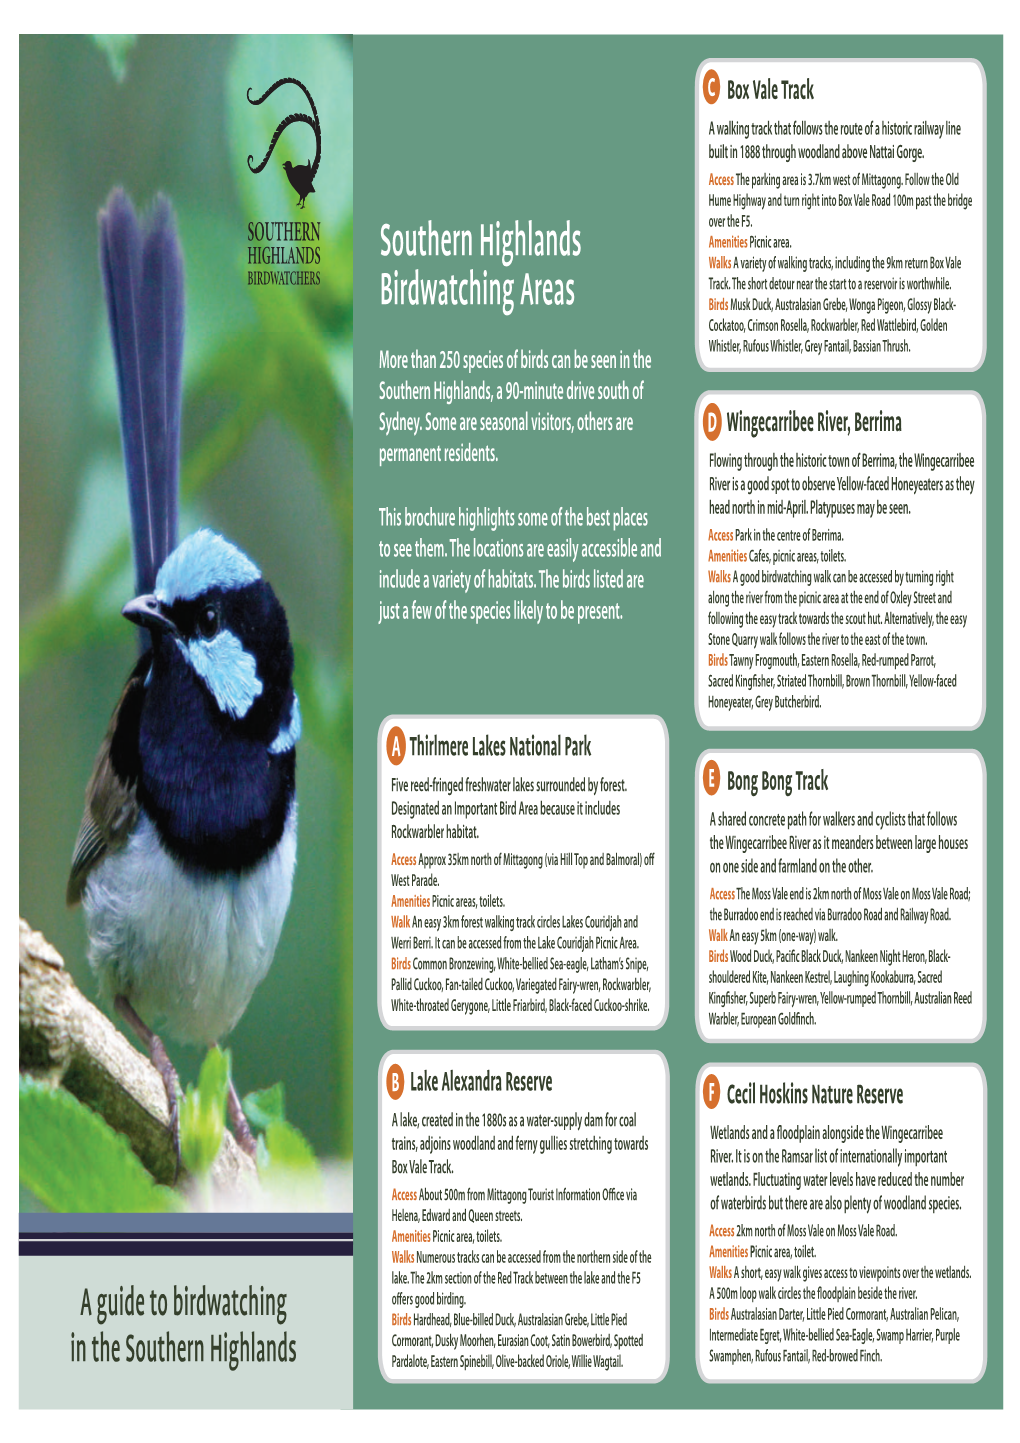 Southern Highlands Birdwatching Areas